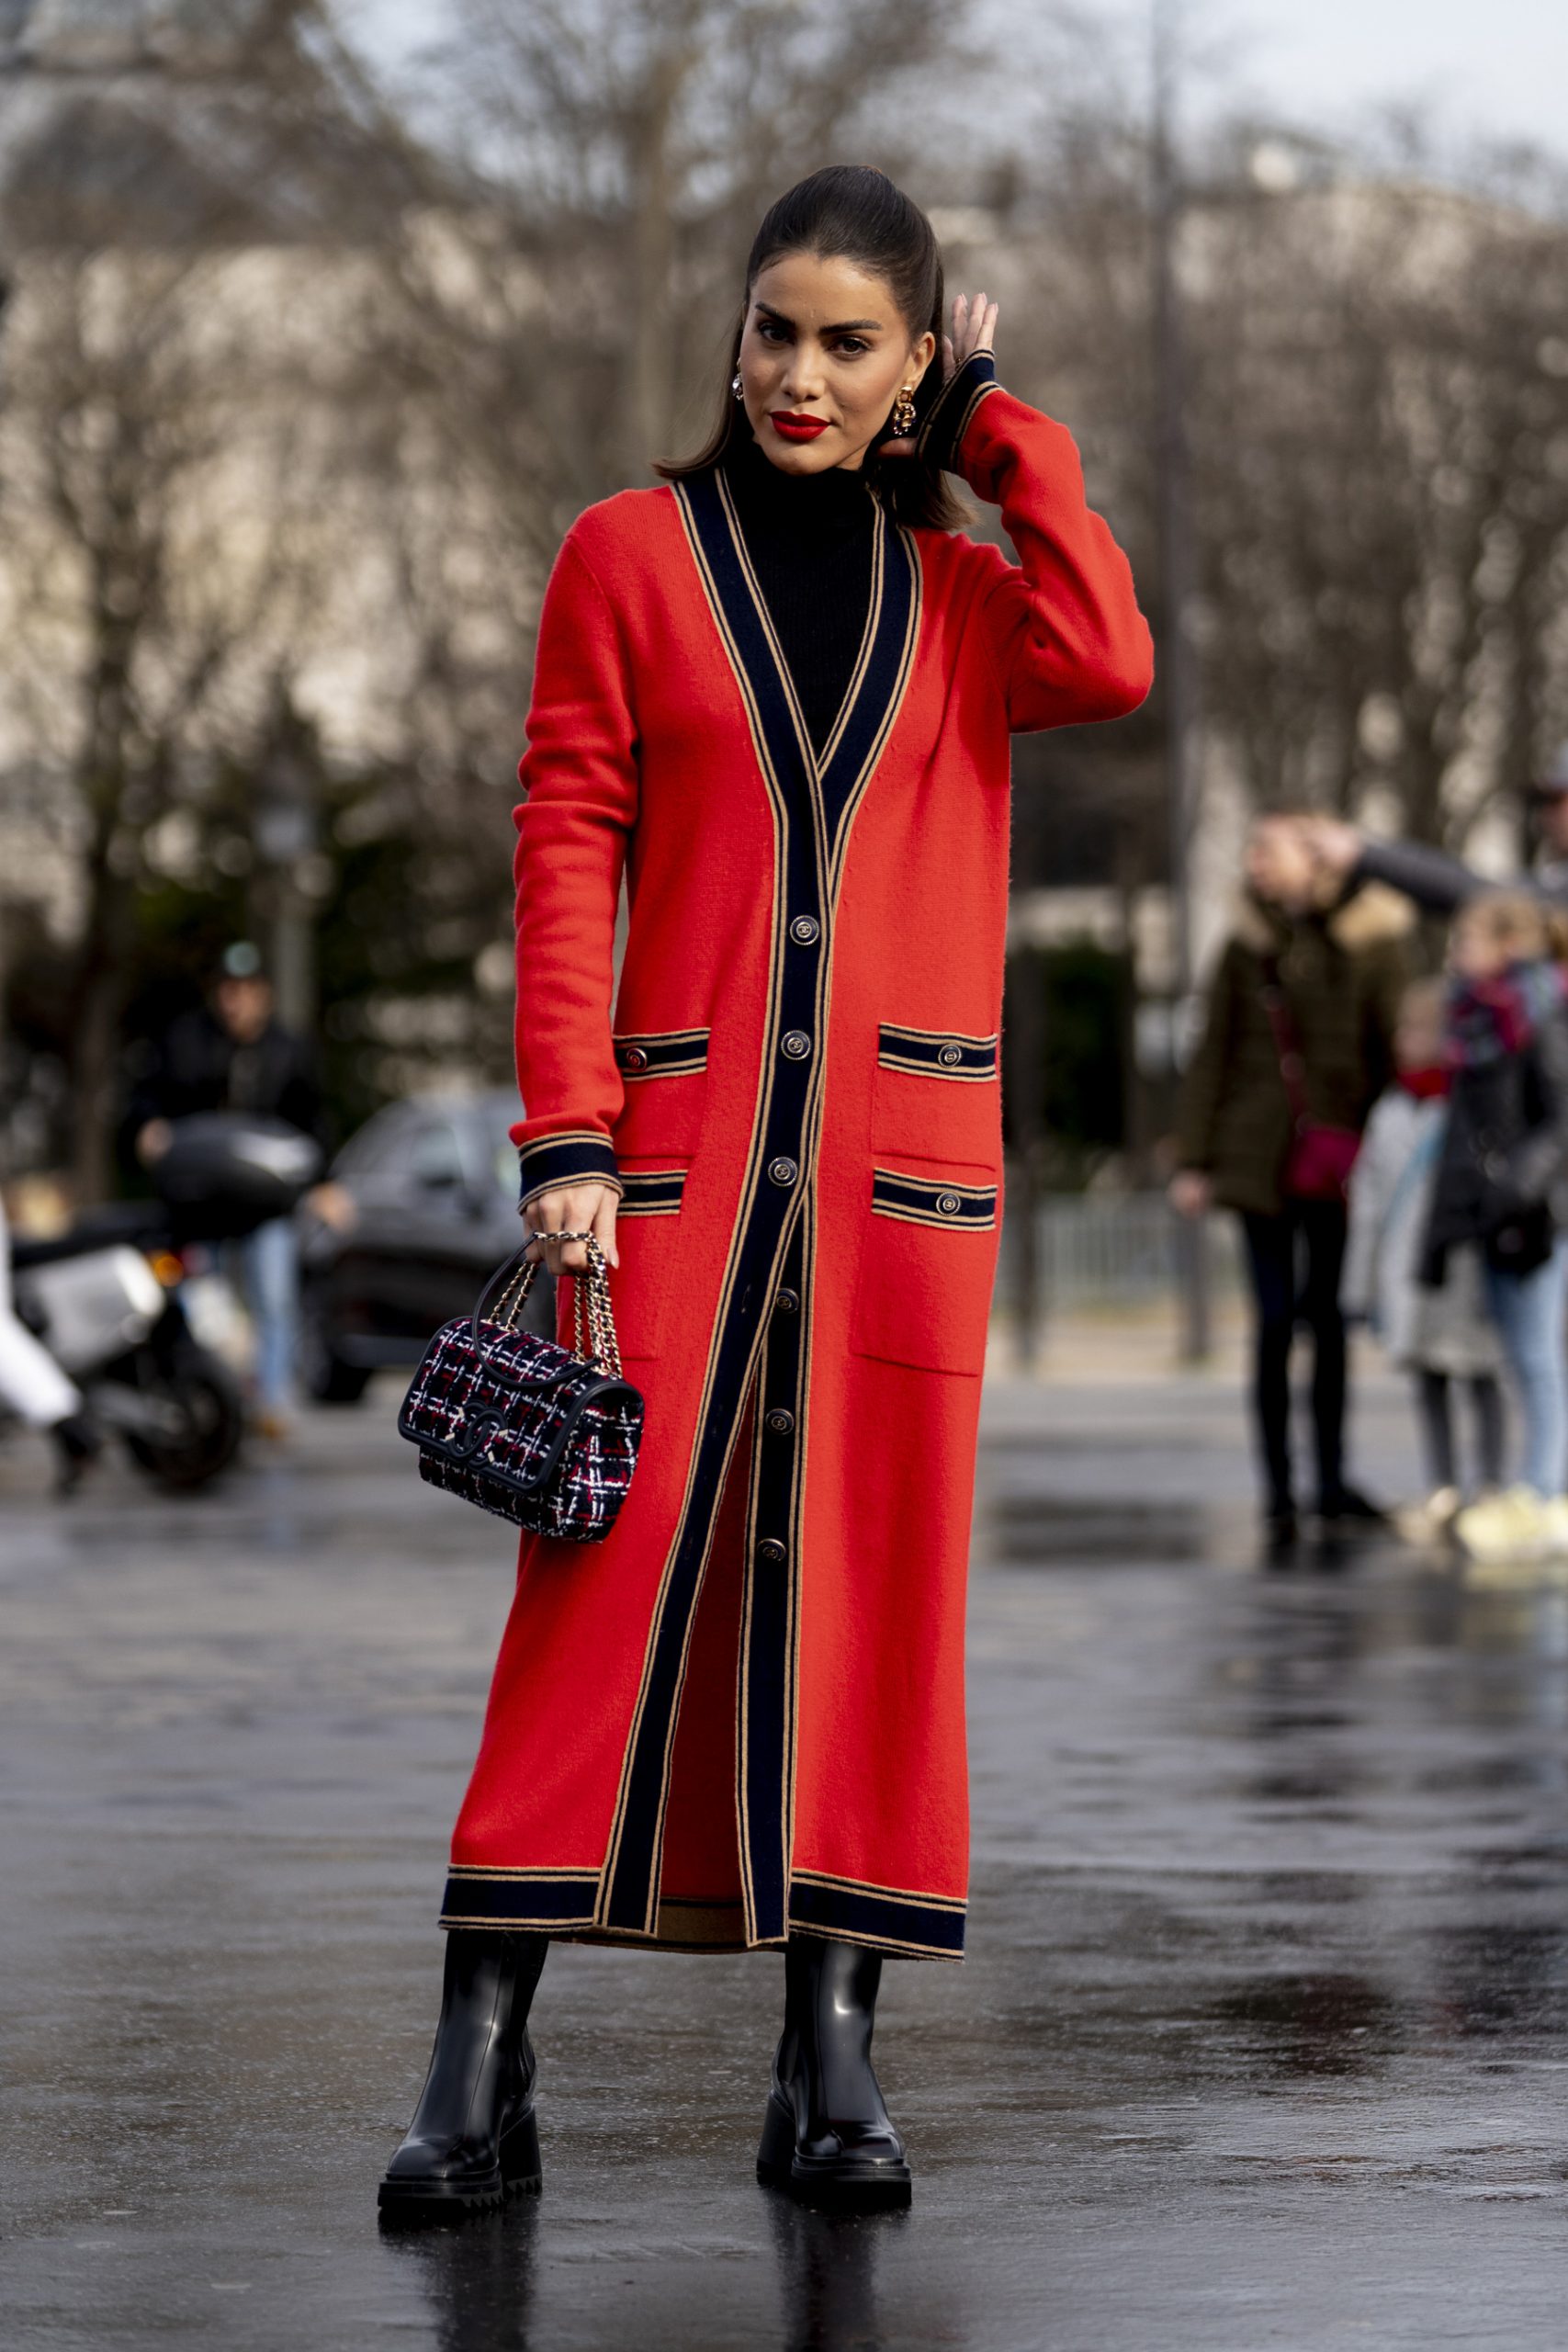 Paris Street Style Influencer Looks Fall 2020 | The Impression